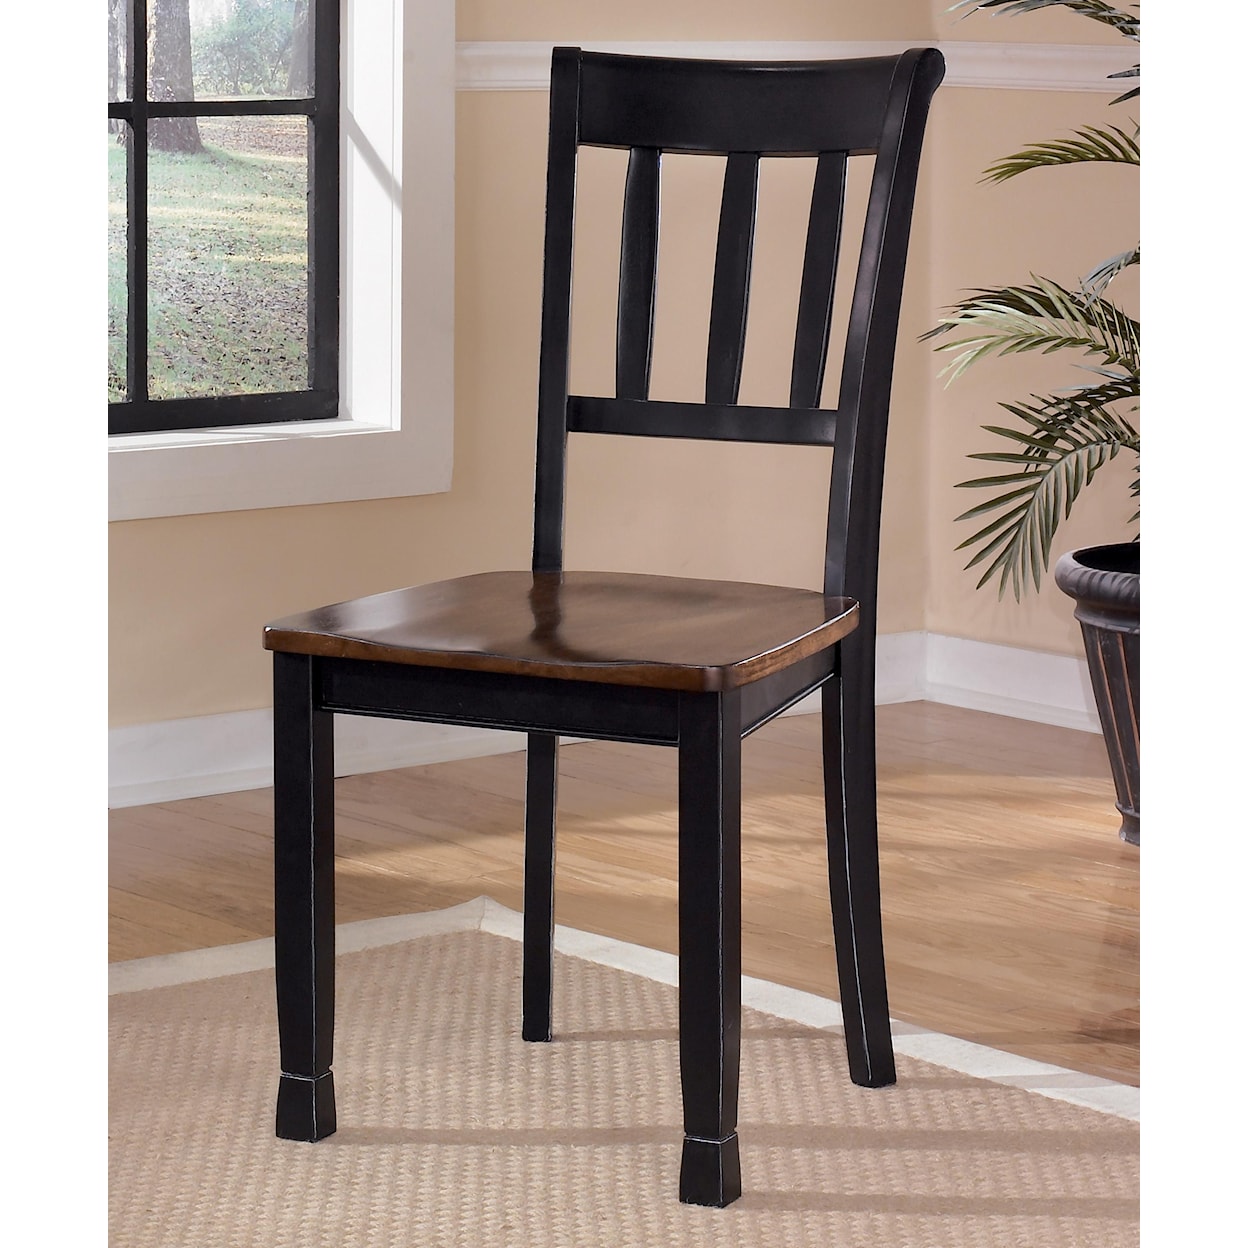 Signature Design by Ashley Owingsville Dining Room Side Chair